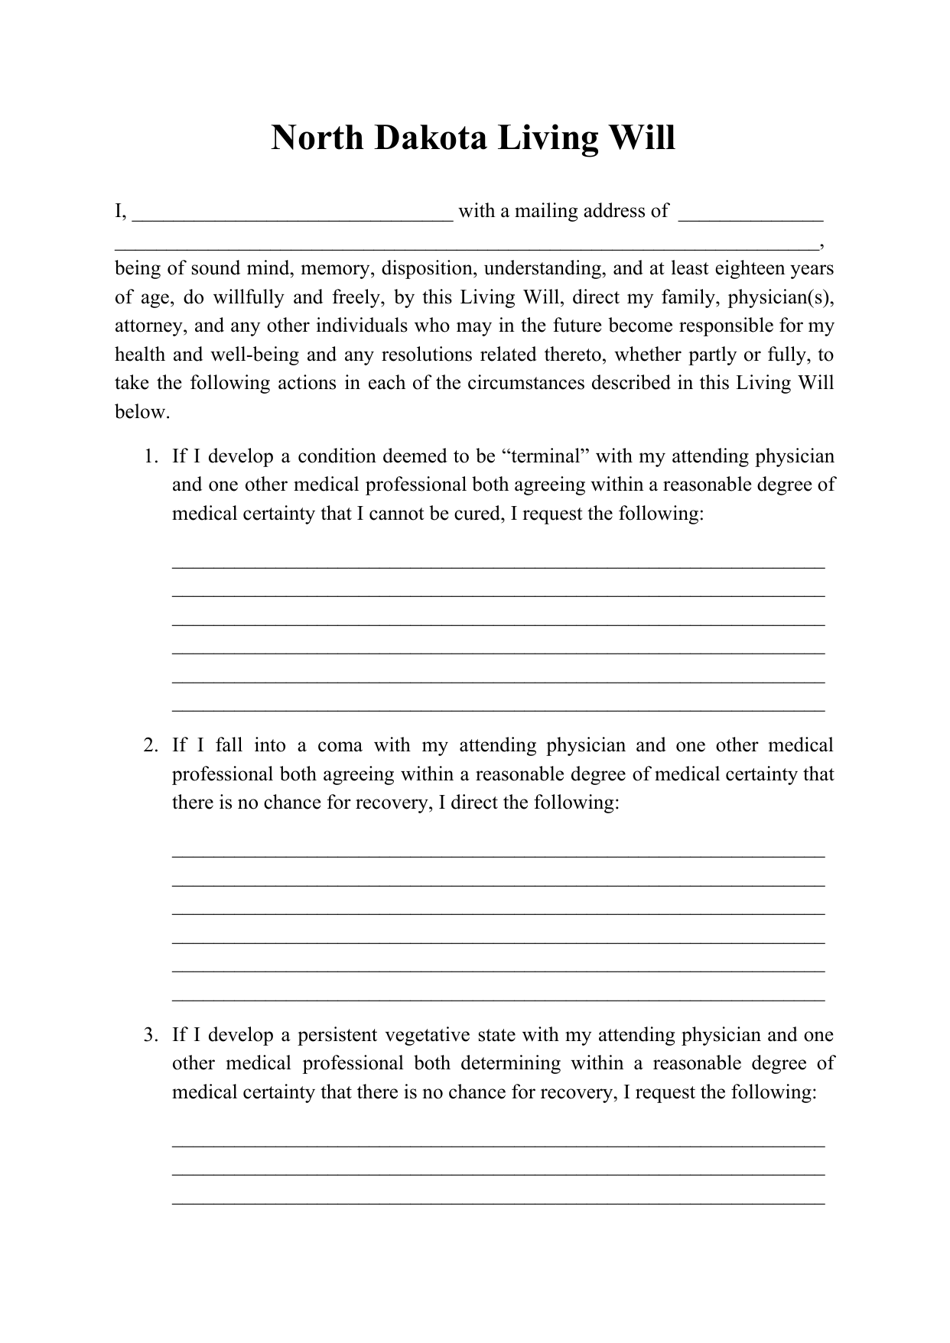 north-dakota-living-will-form-fill-out-sign-online-and-download-pdf